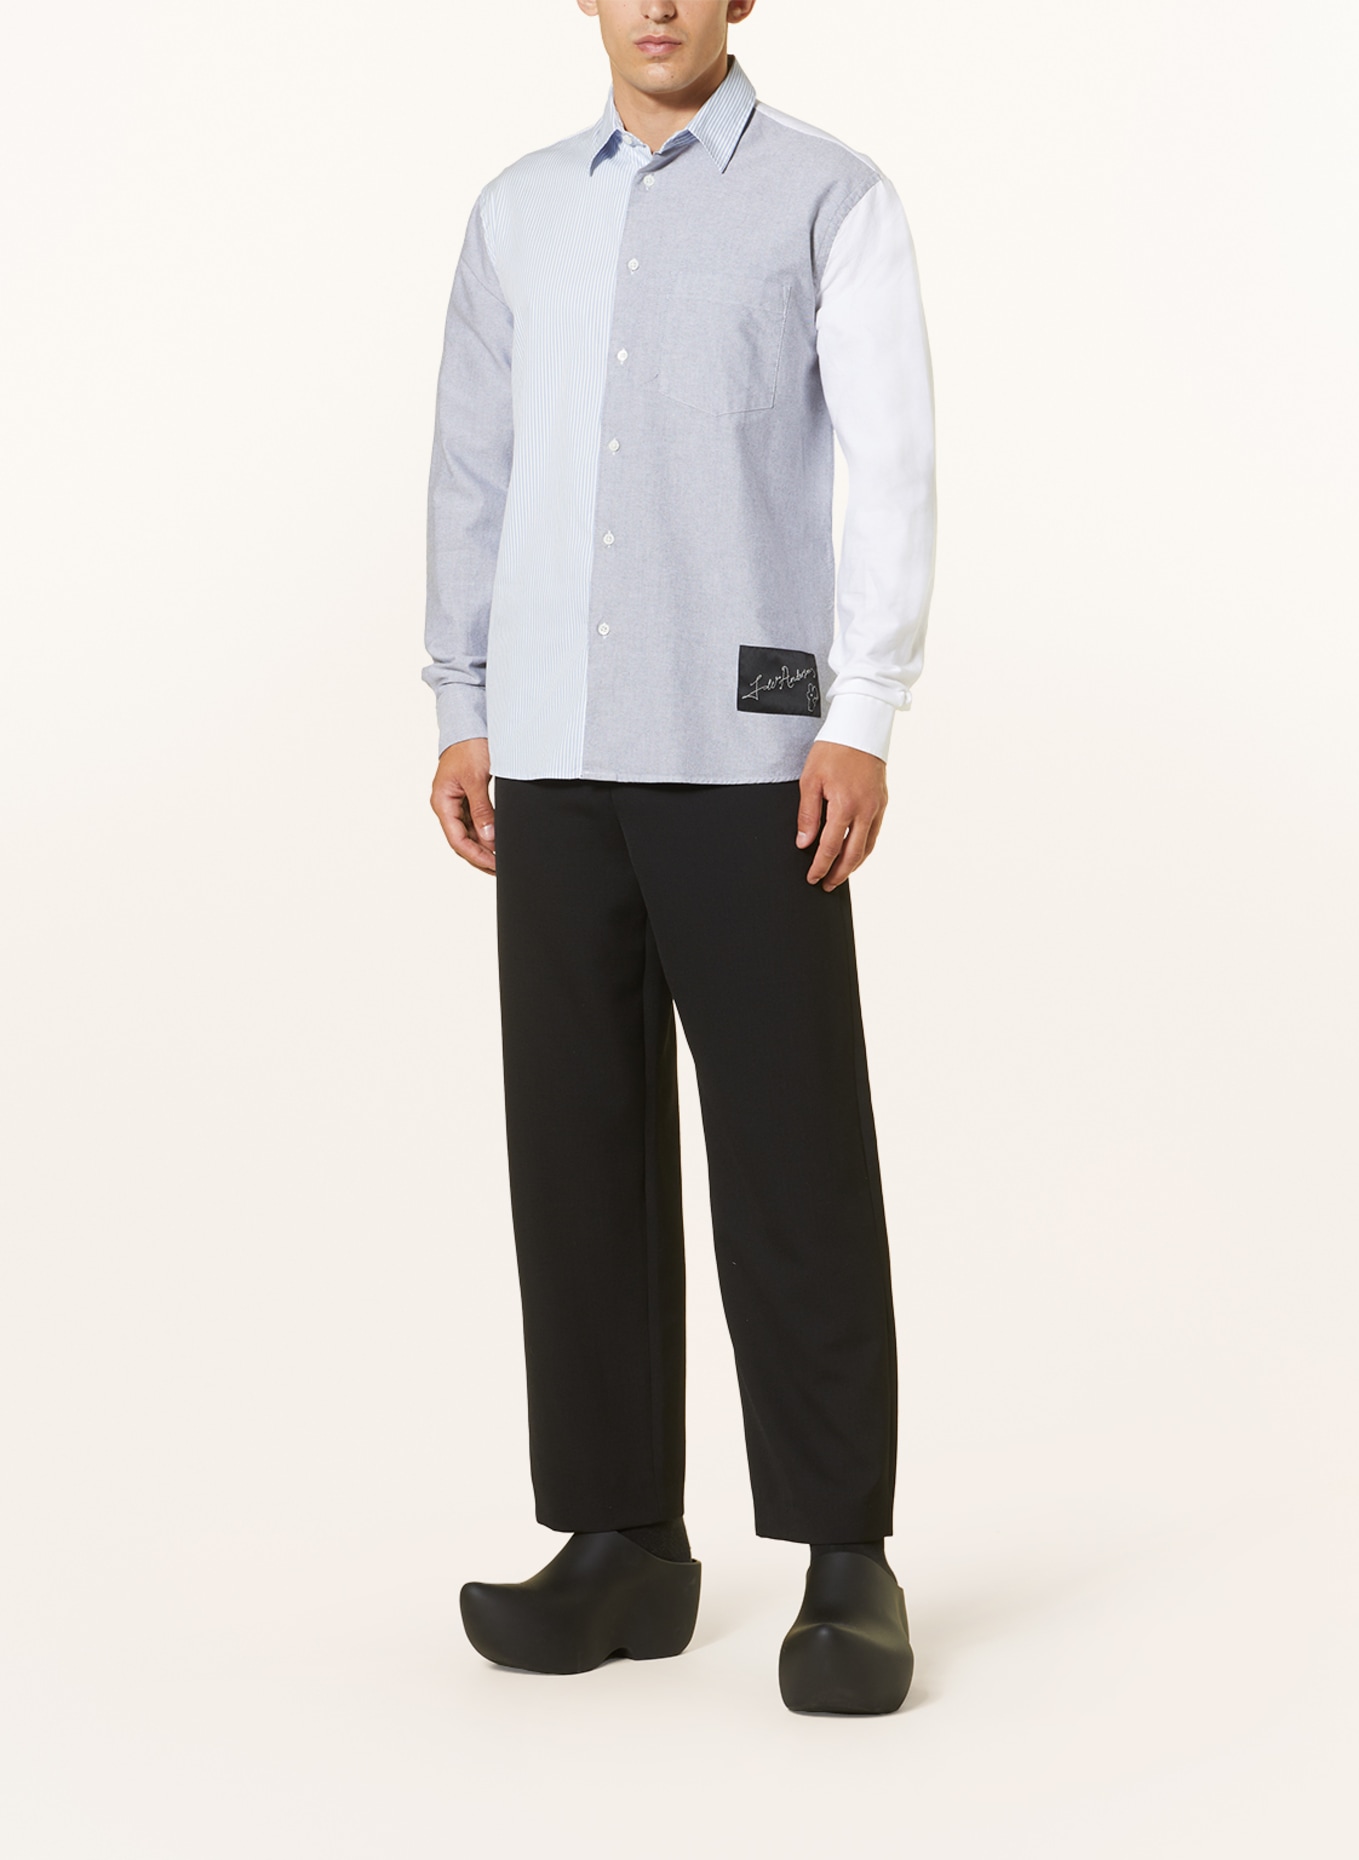 JW ANDERSON Shirt classic fit, Color: LIGHT BLUE/ GRAY/ WHITE (Image 2)